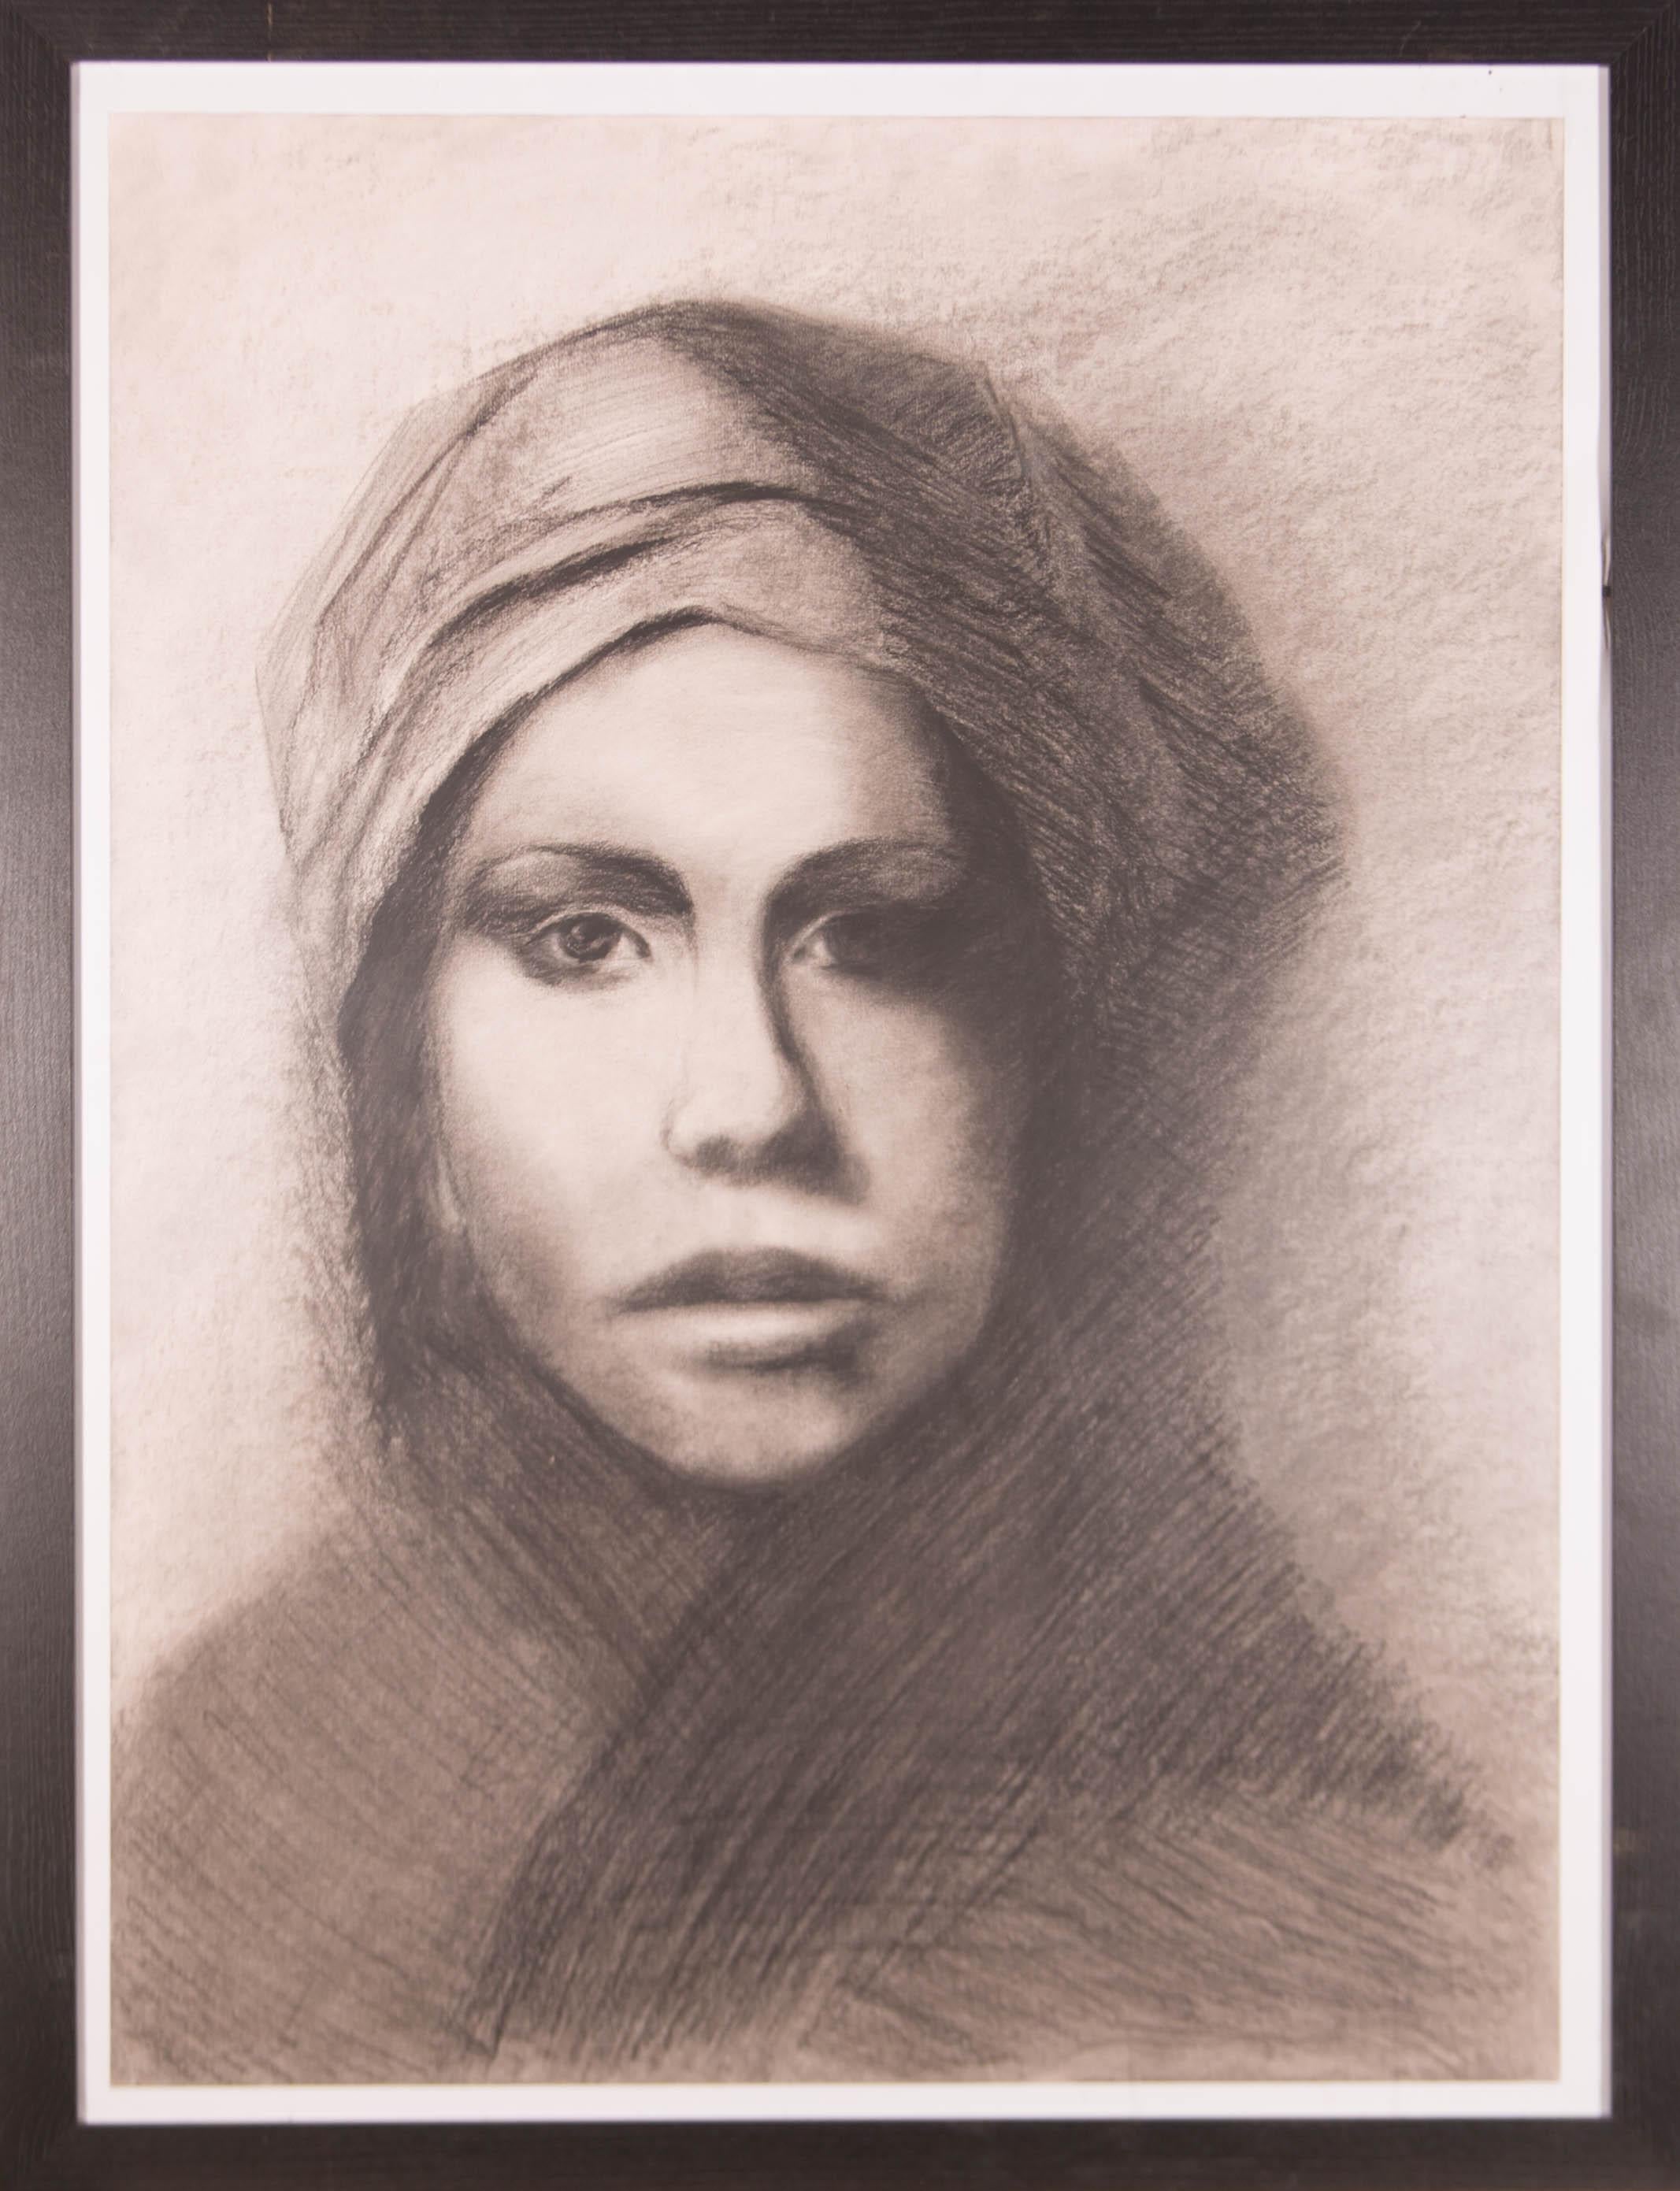 20th Century Charcoal Drawing - Pensive Female Portrait - Art by Unknown